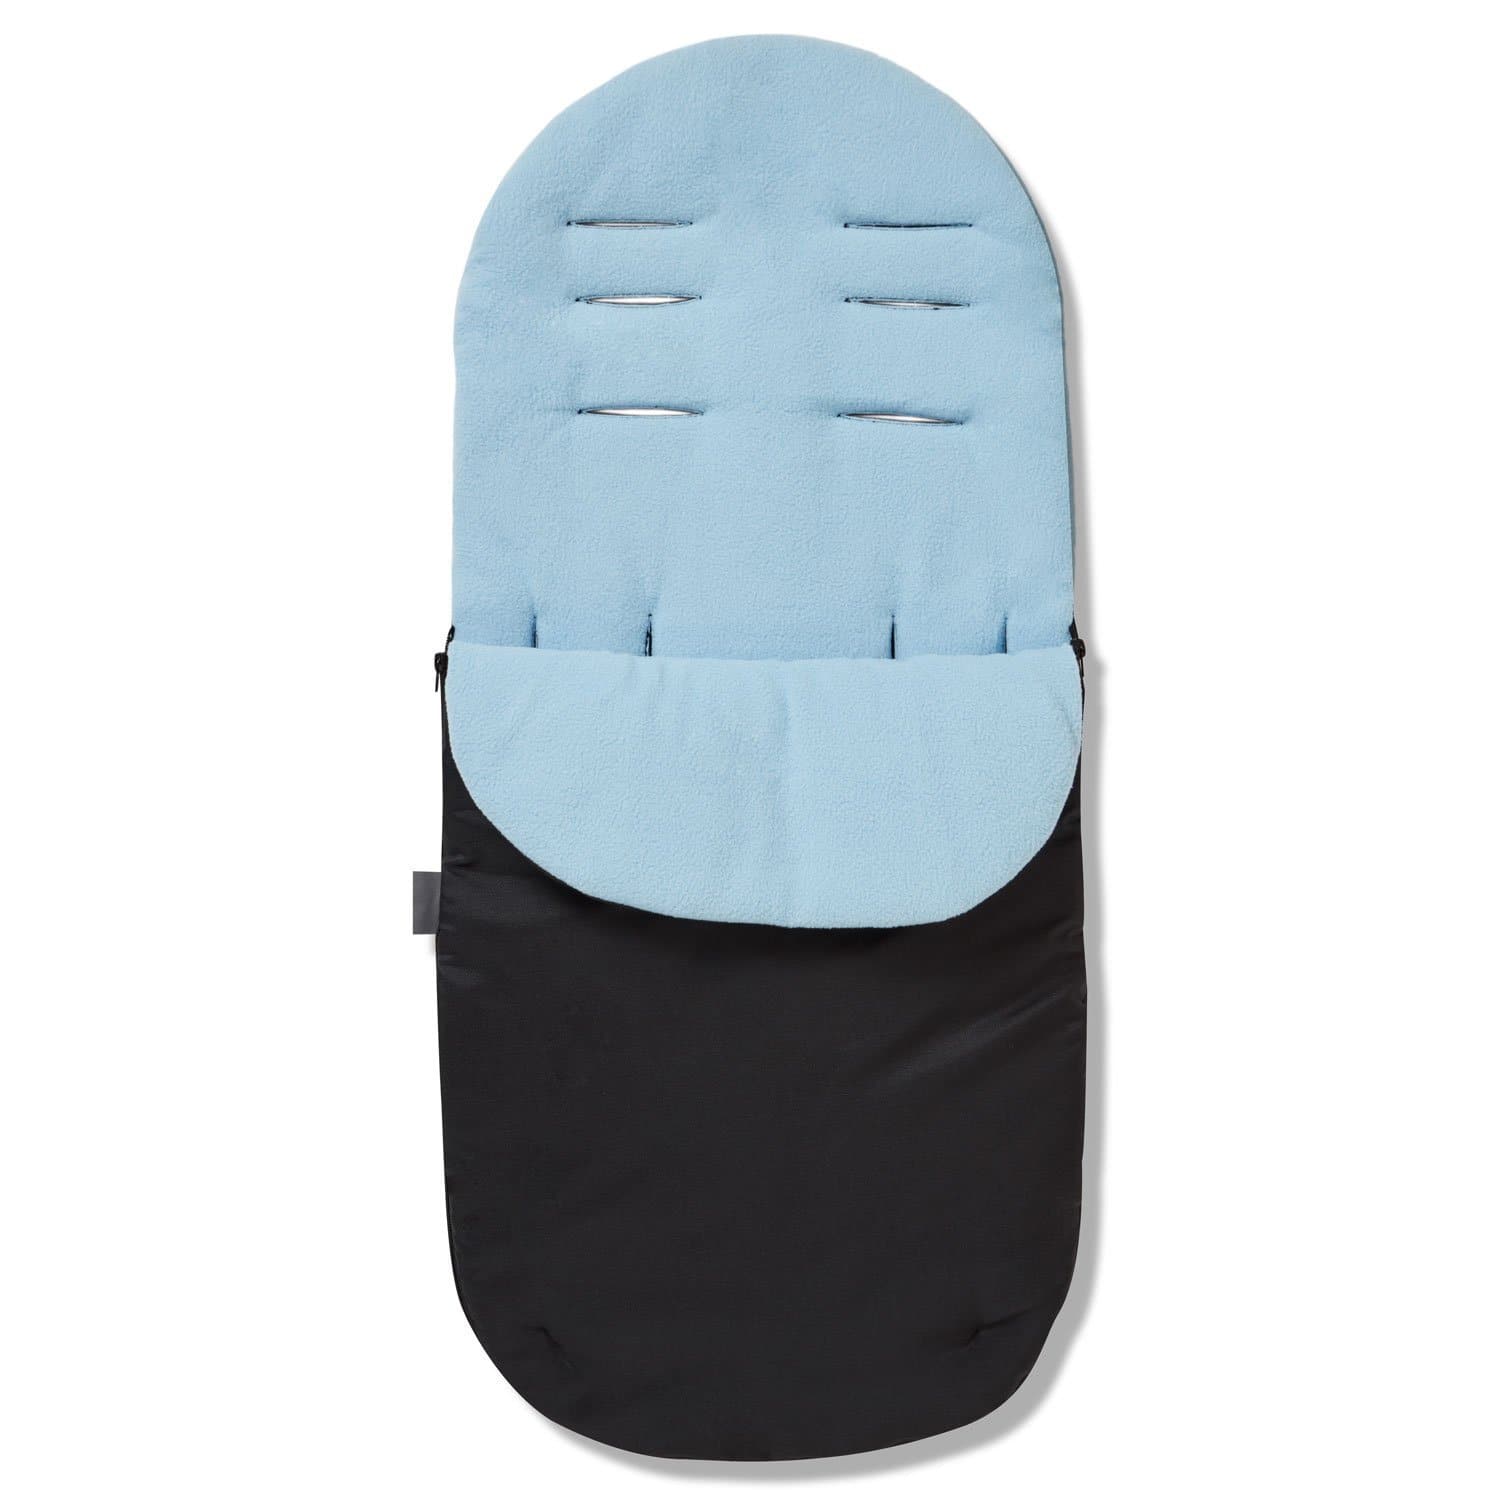 Footmuff / Cosy Toes Compatible with Venicci - Light Blue / Fits All Models | For Your Little One